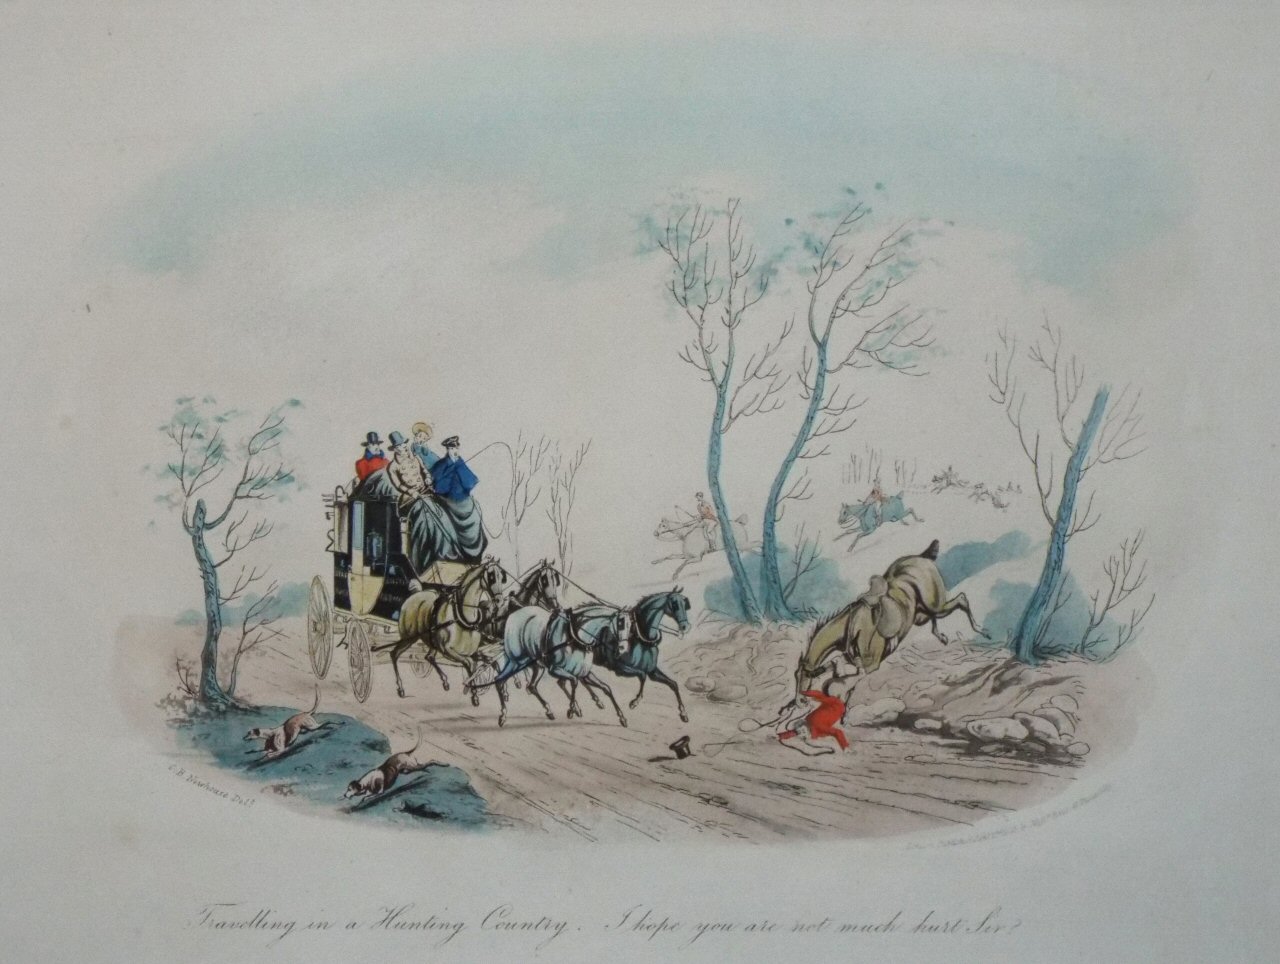 Aquatint - Travelling in a Hunting Country. I hope you are not much hurt sir?